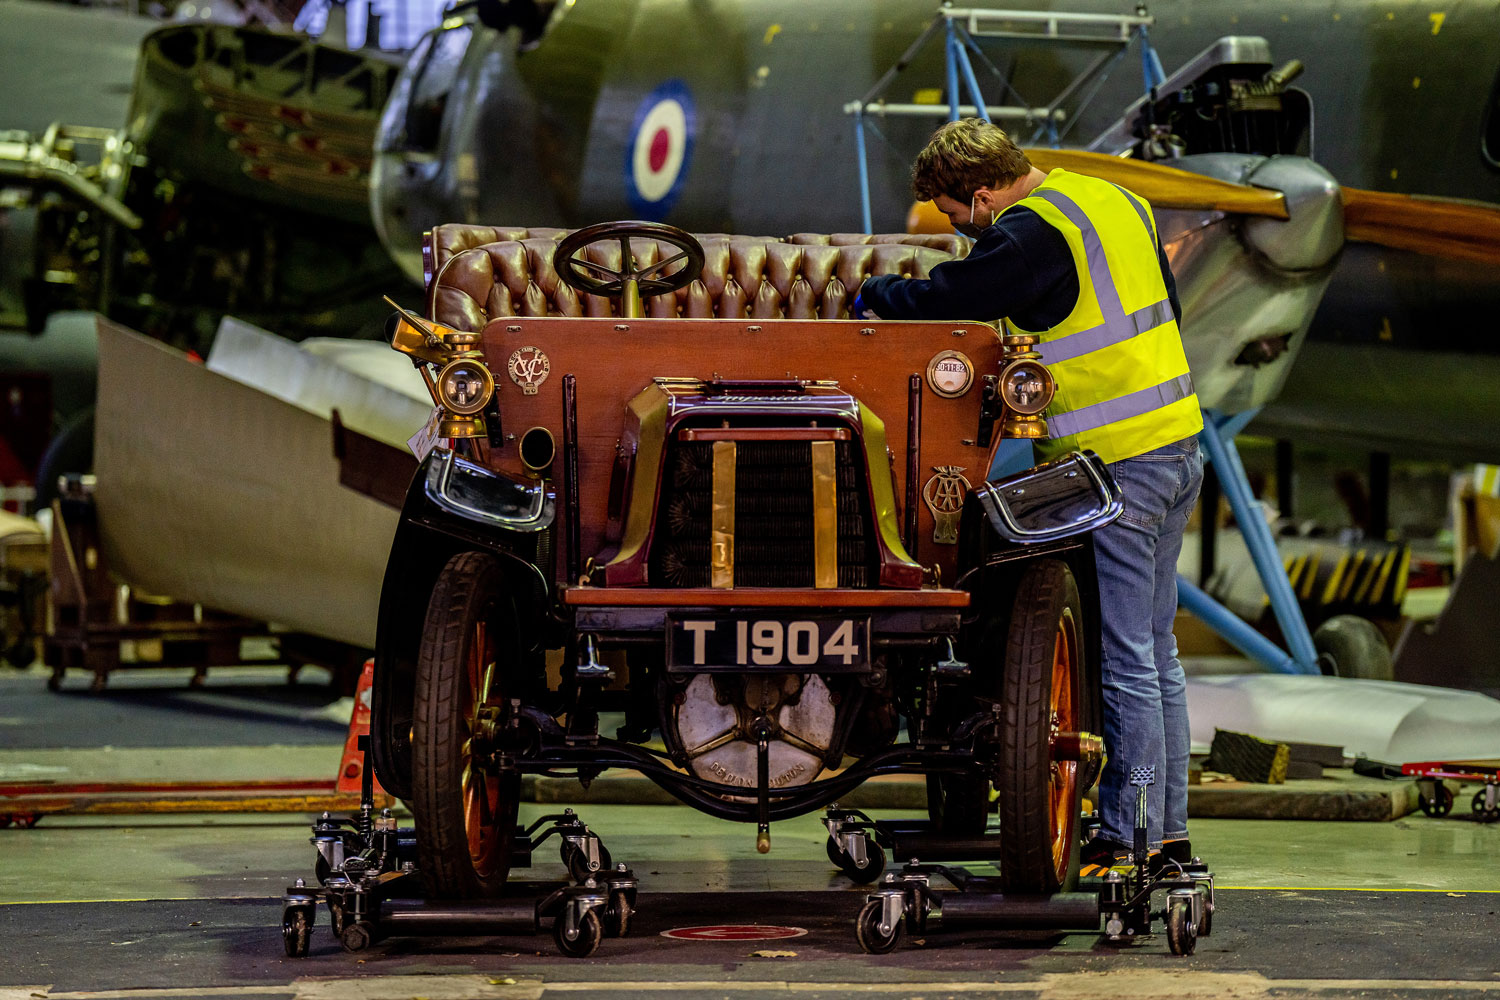 A man in a high-vis jacket cleaning the inside of an old car